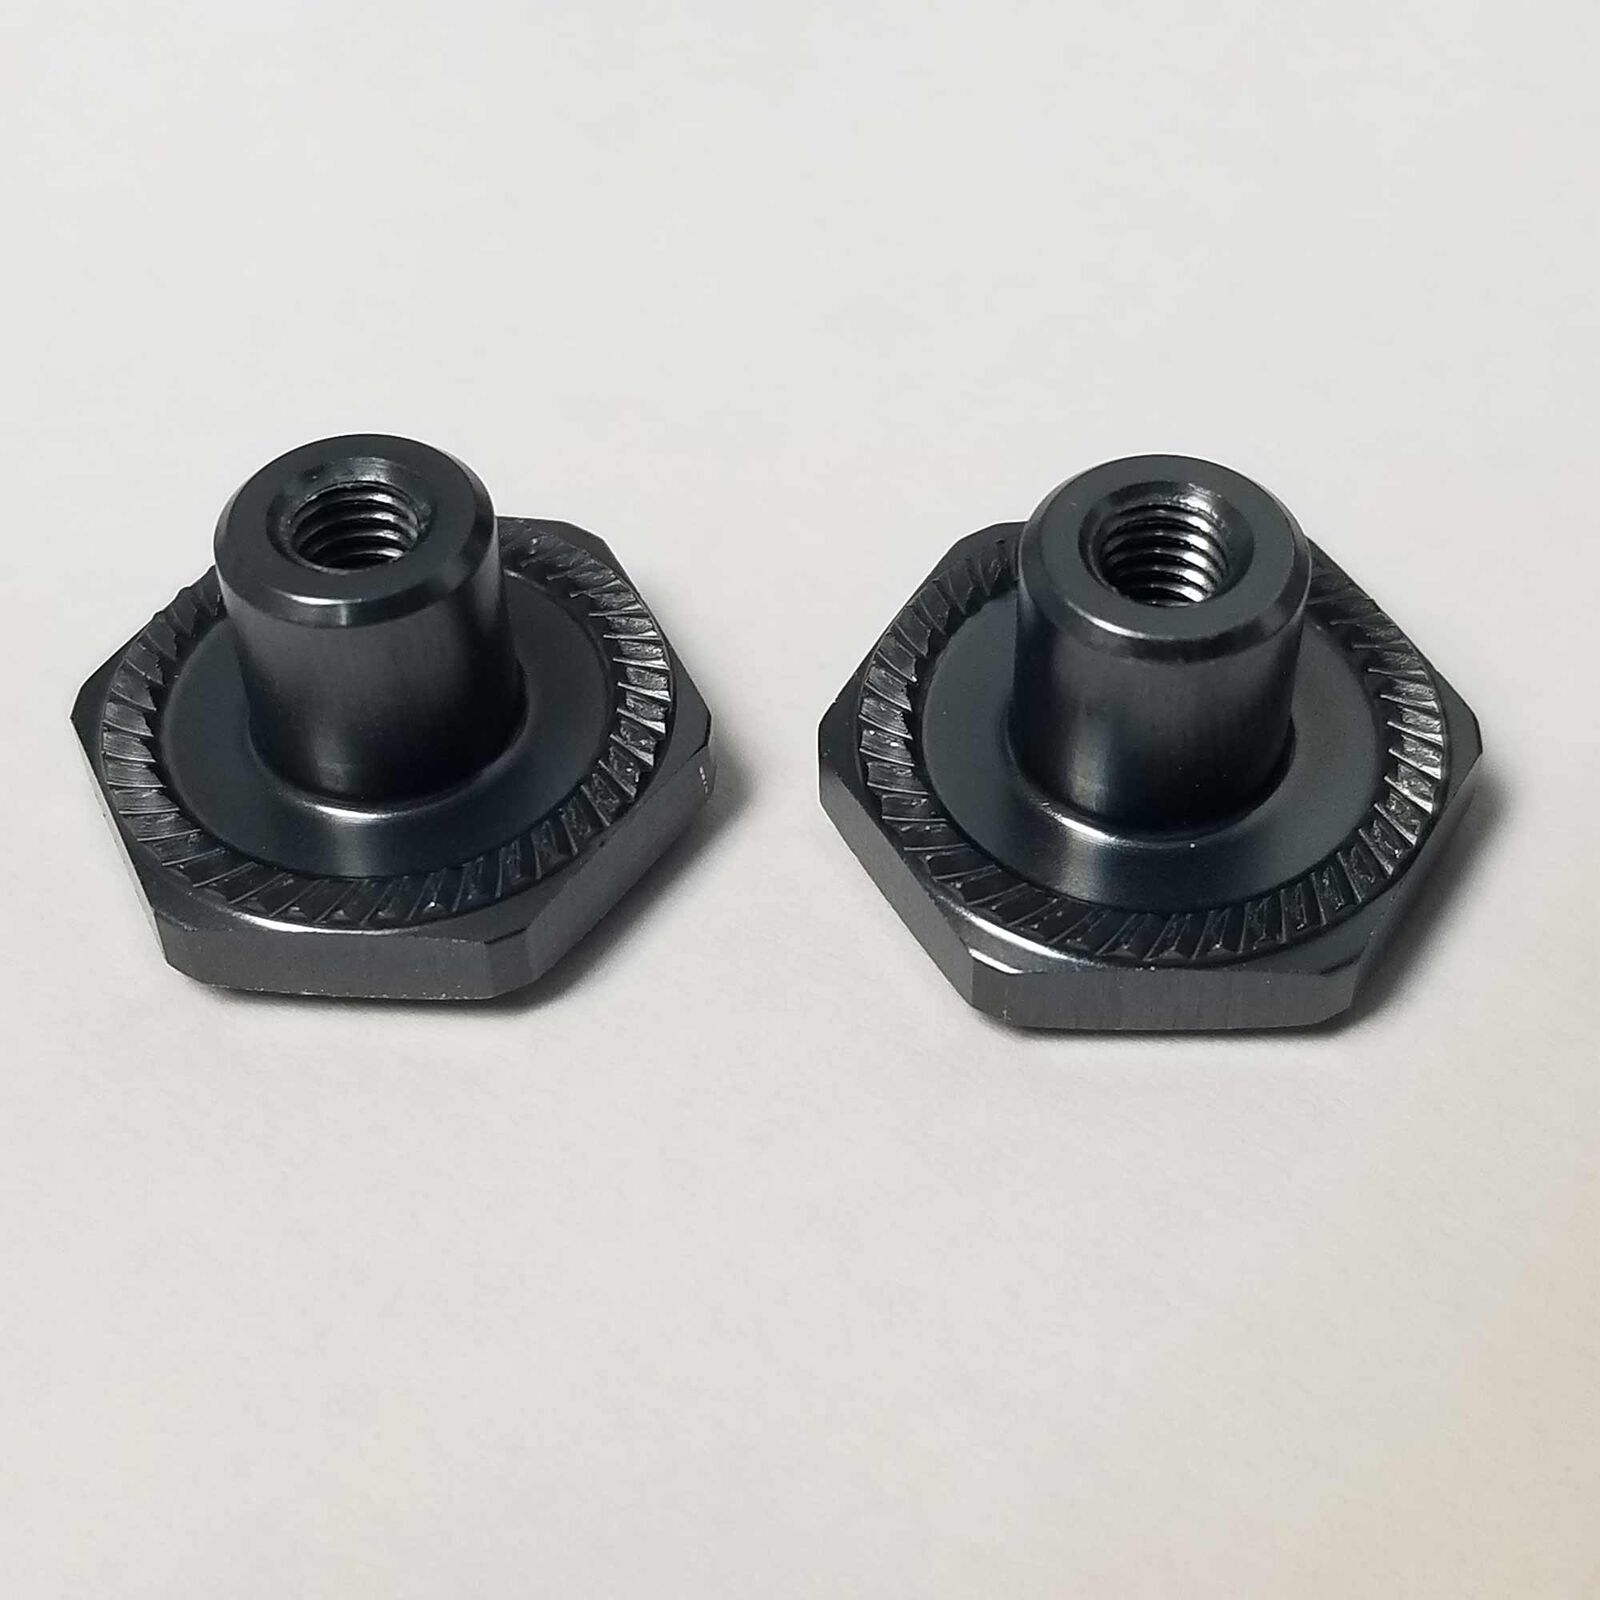 17mm Hex Adapter Nuts, M4x.7 (2)